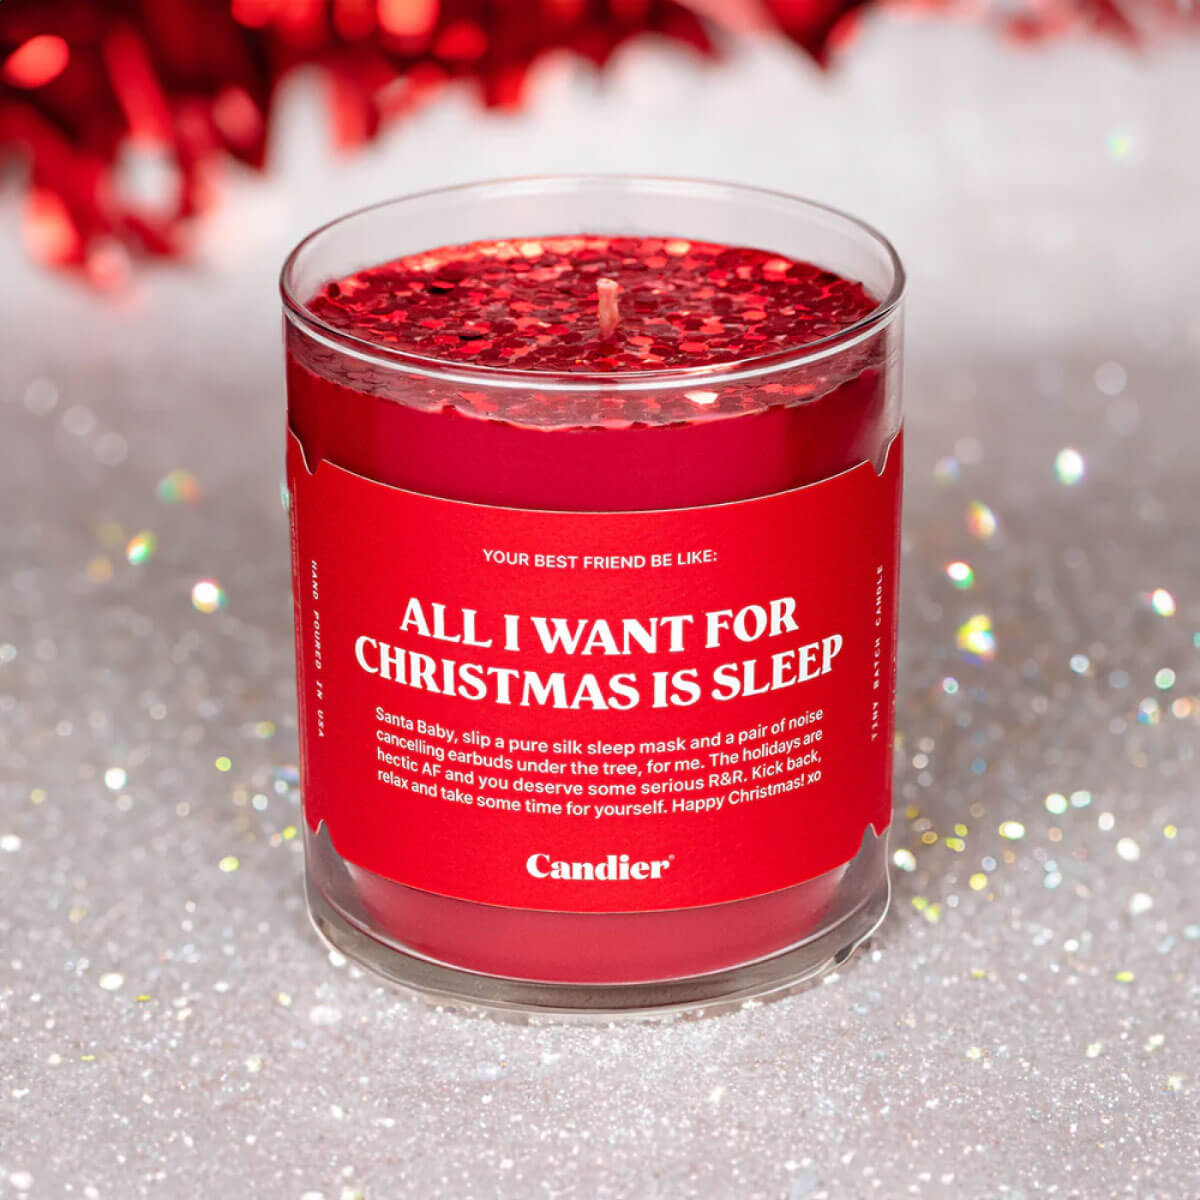 All I Want Glitter Candle by Candier red front | MILK MONEY milkmoney.co | soy wax candles, small candles. natural candles, organic candles, scented soy candles, concrete candle, hand poured candles, hand poured soy candles, cement candle, hand poured soy wax candles, scented hand poured candles, hand poured scented candles